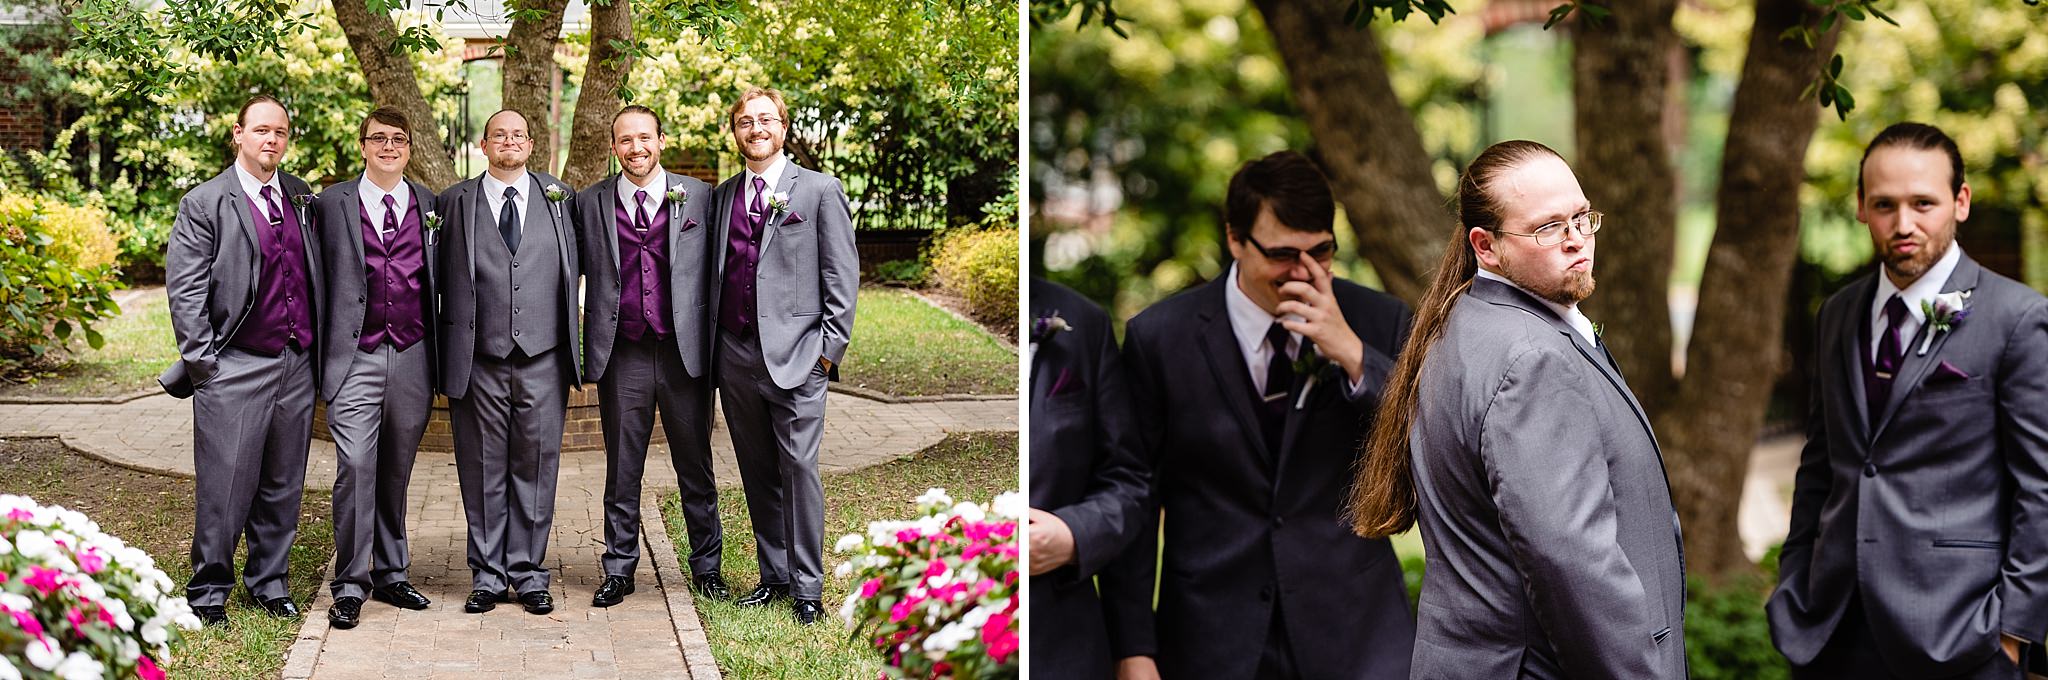 Groom and groomsmen in grey suits with purple vests and ties by Durham North Carolina Wedding Photographer